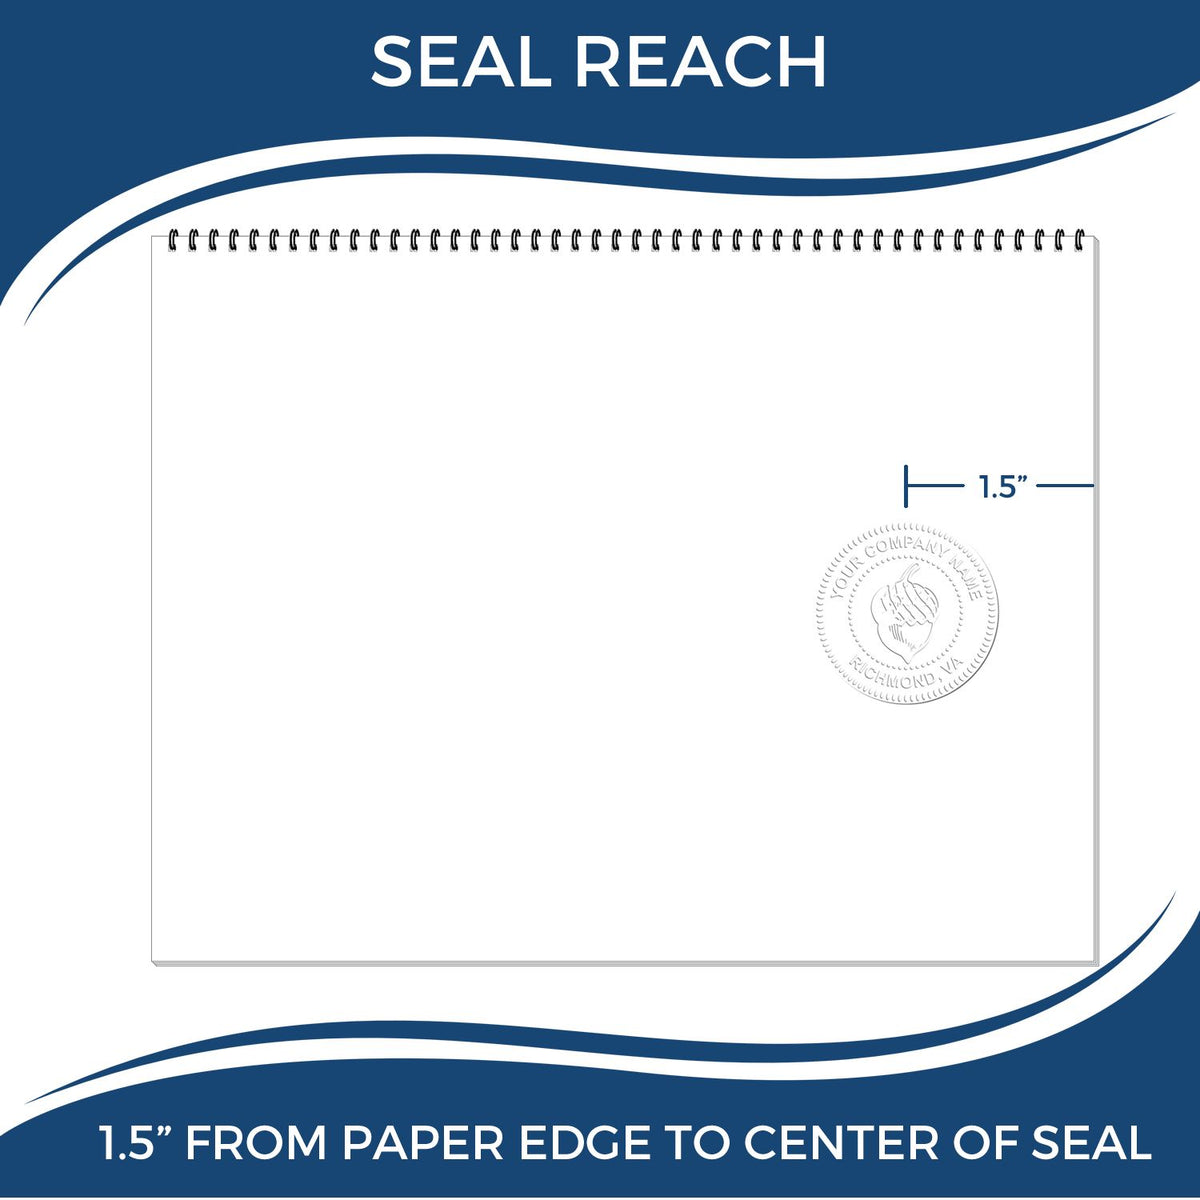 An infographic showing the seal reach which is represented by a ruler and a miniature seal image of the Handheld Massachusetts Professional Engineer Embosser